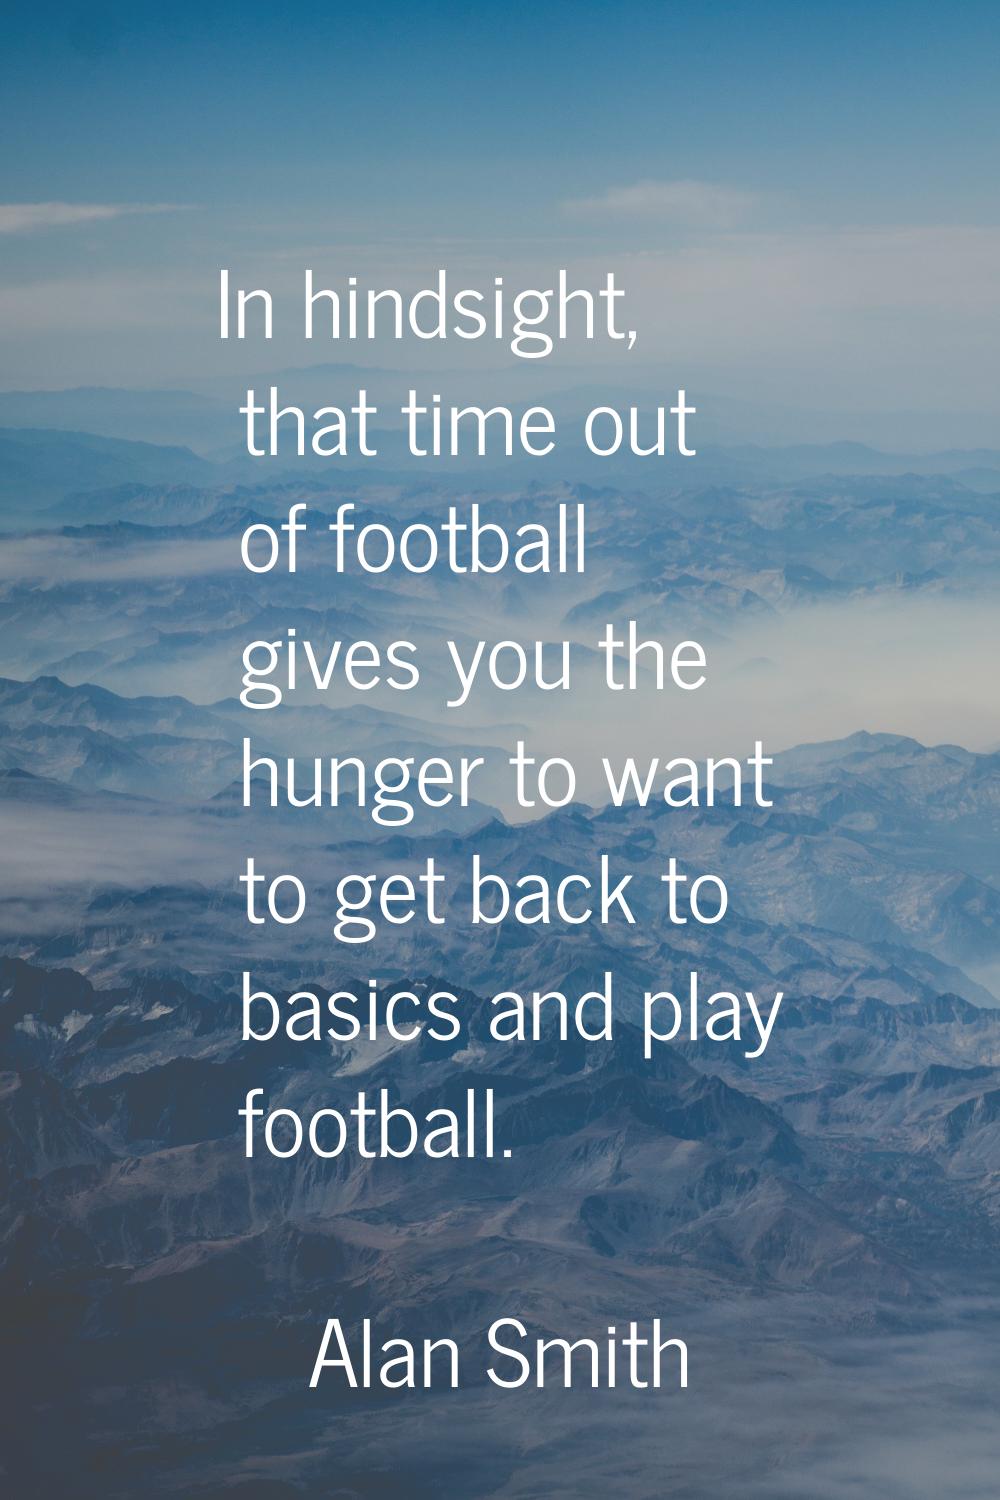 In hindsight, that time out of football gives you the hunger to want to get back to basics and play